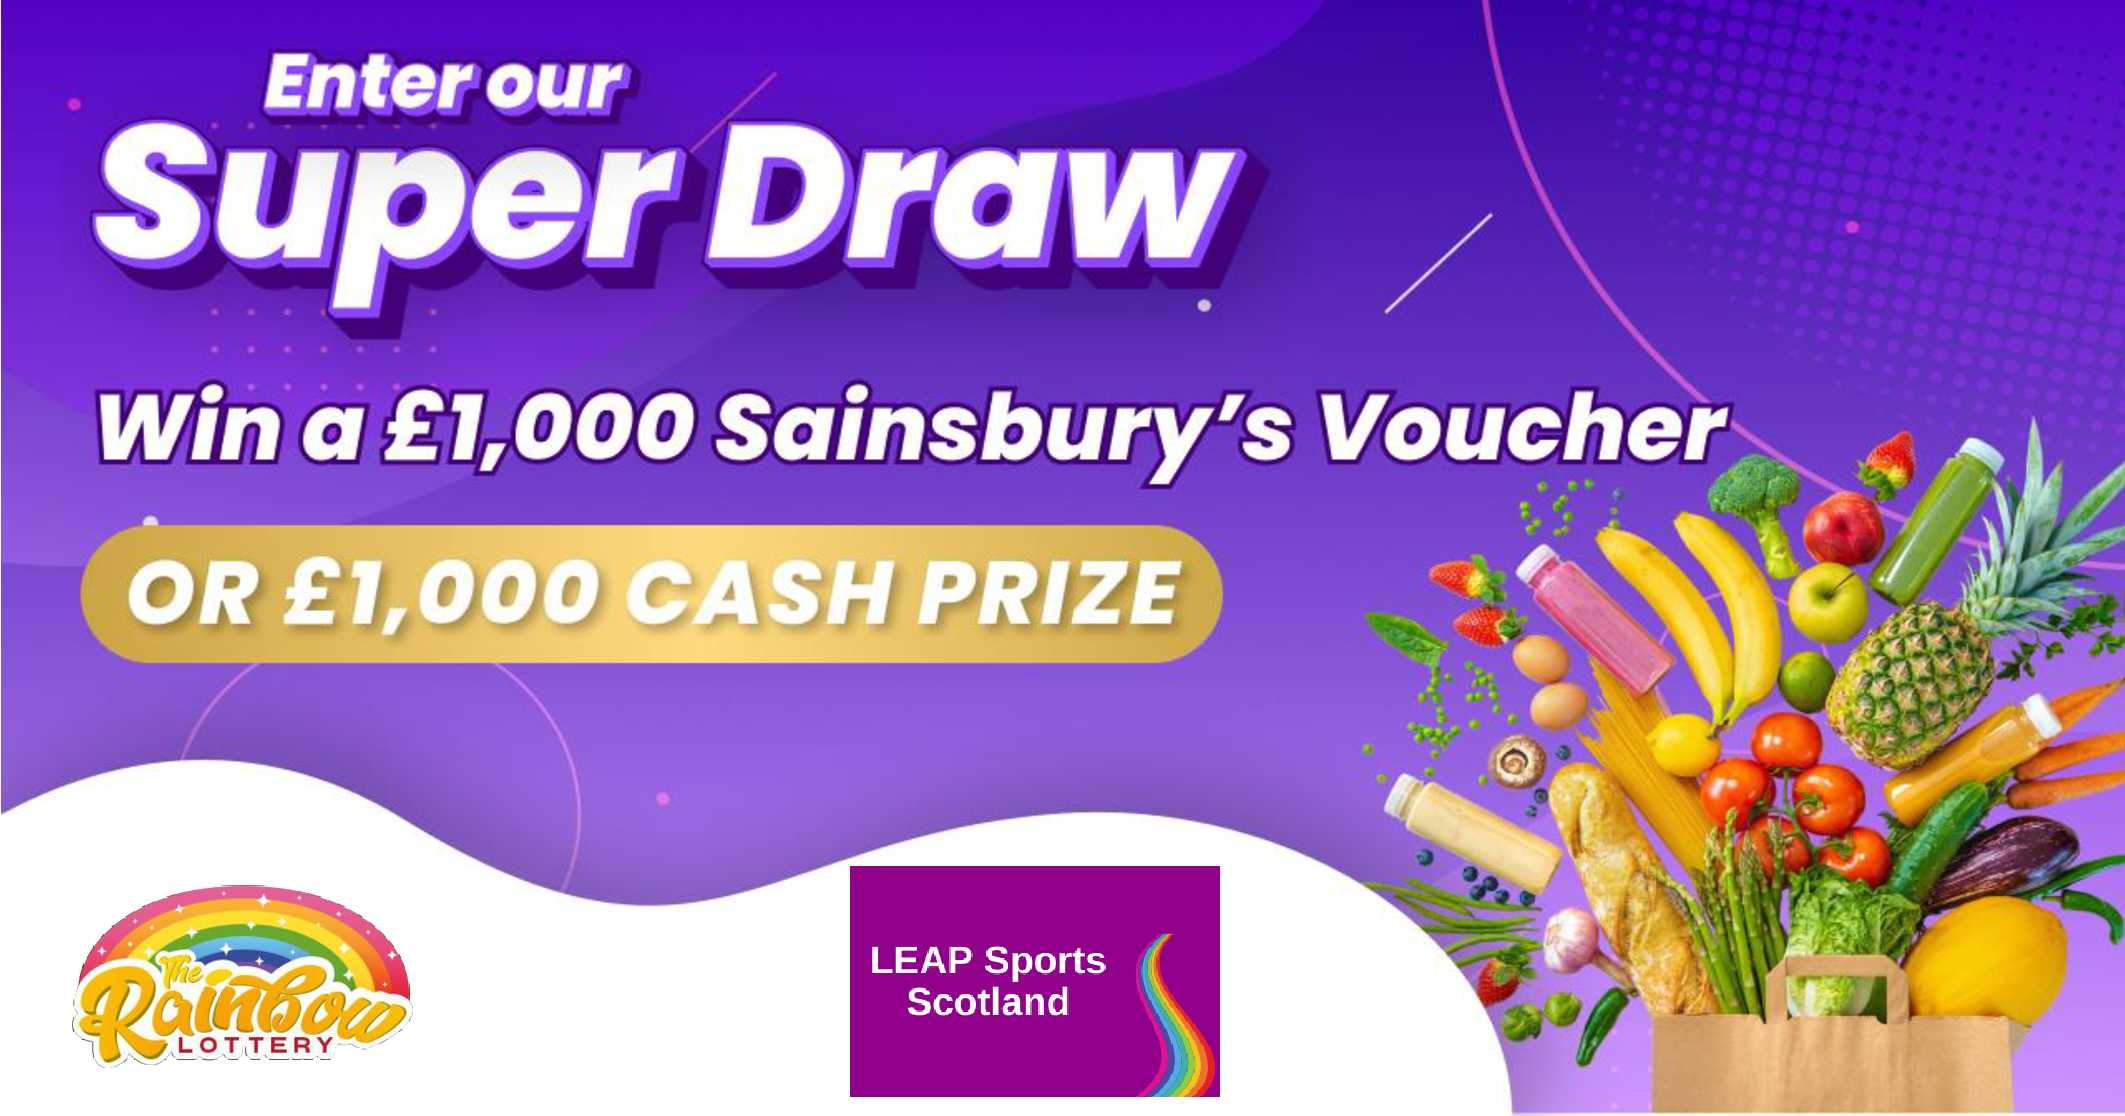 Support LEAP Sports Scotland when you play The Rainbow Lottery